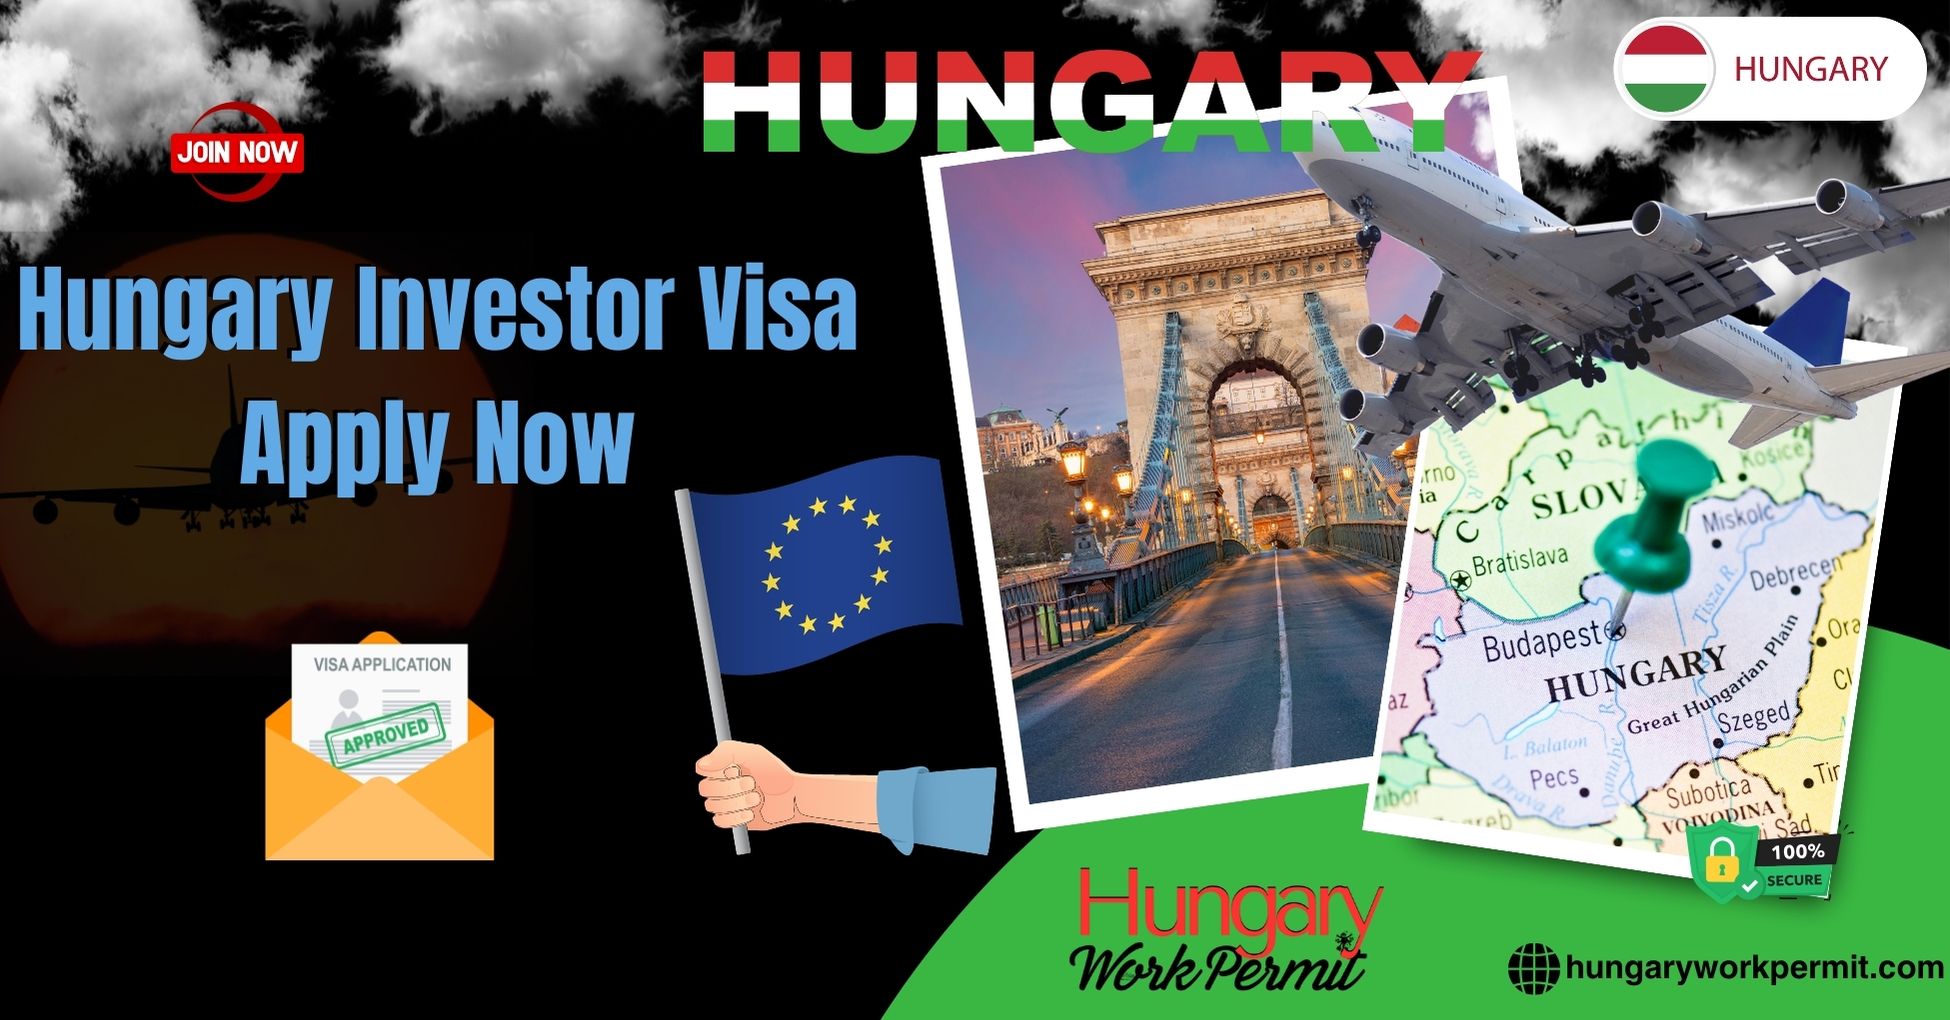 How to Apply for a Hungary Investor Visa?